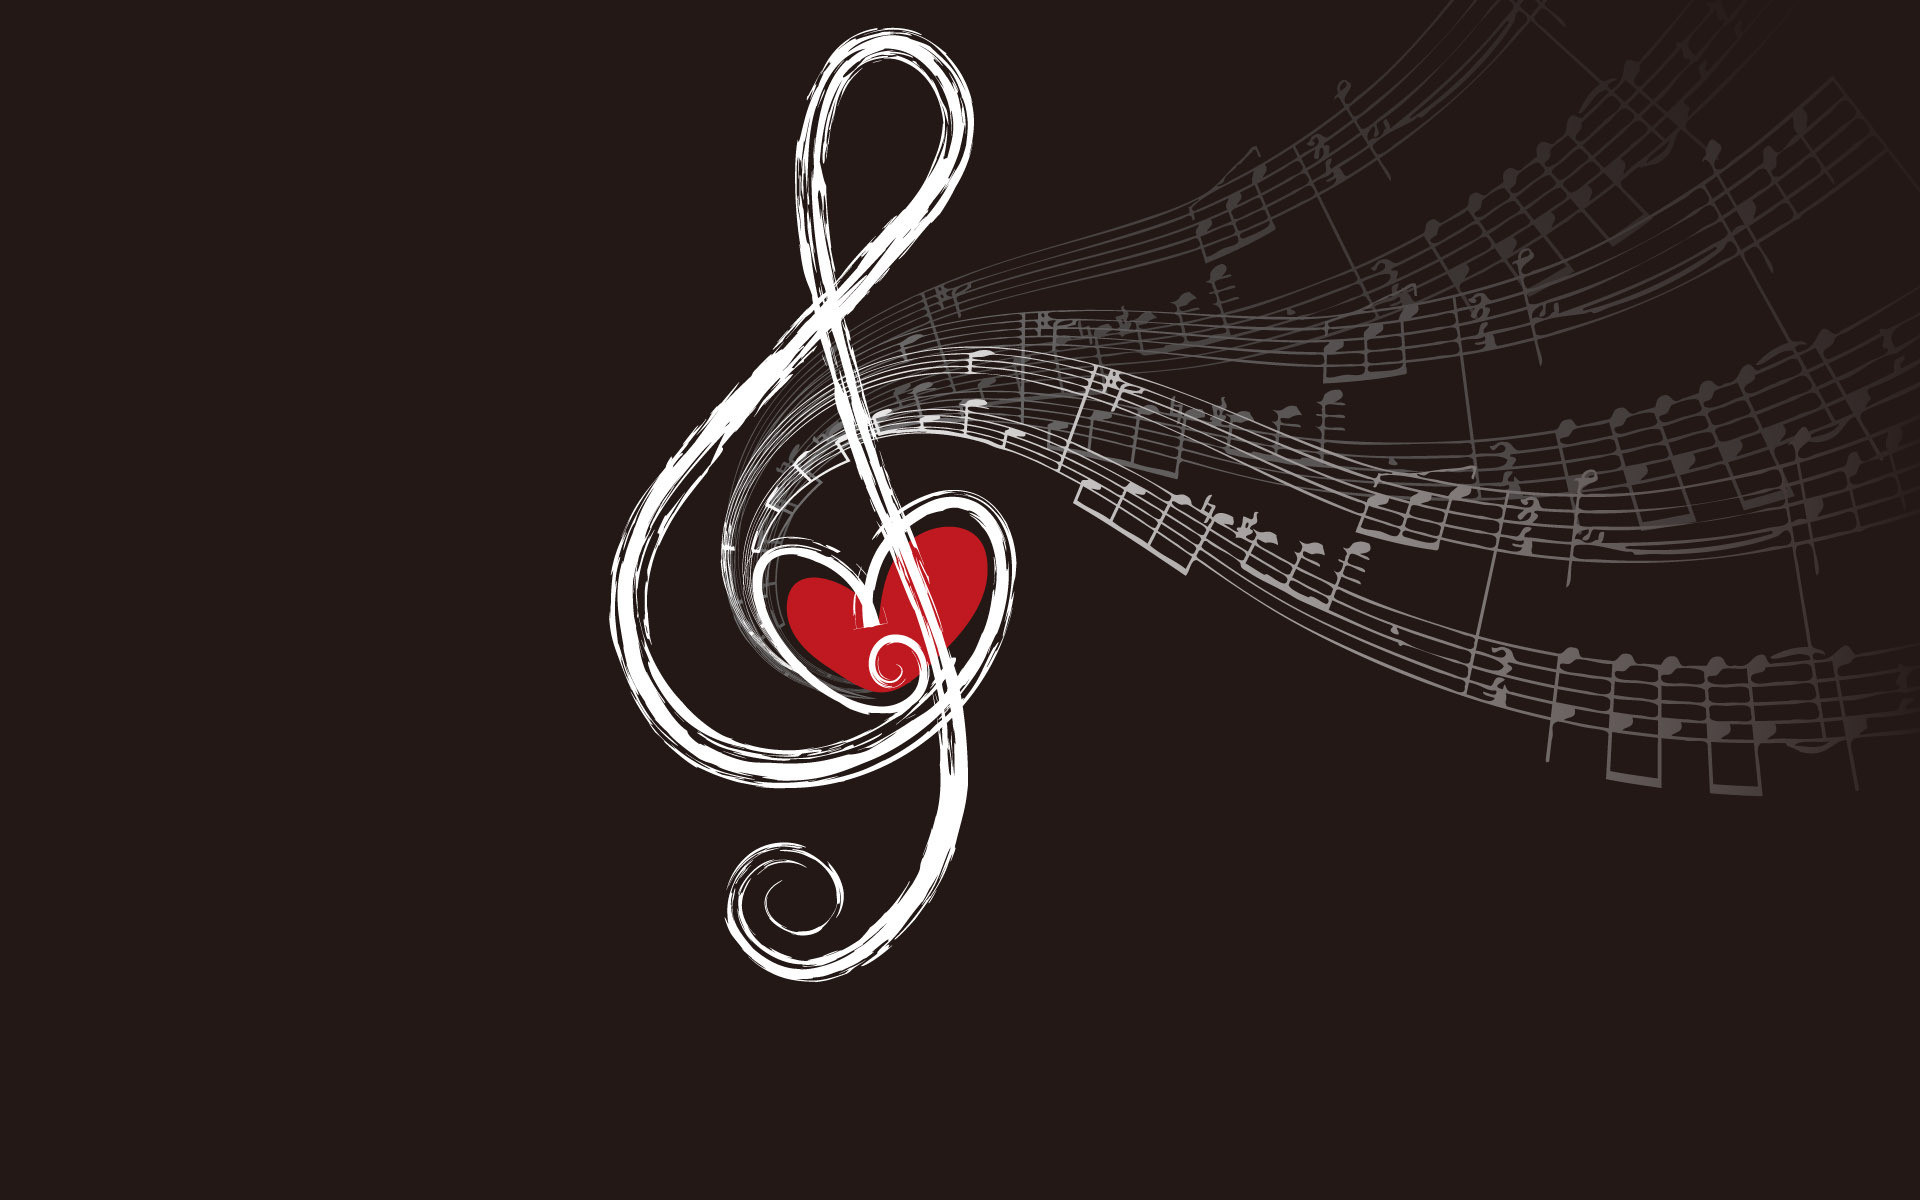 1920x1200 backgrounds-music-sheet-background-violin-powerpoint-wallpapers-hd .